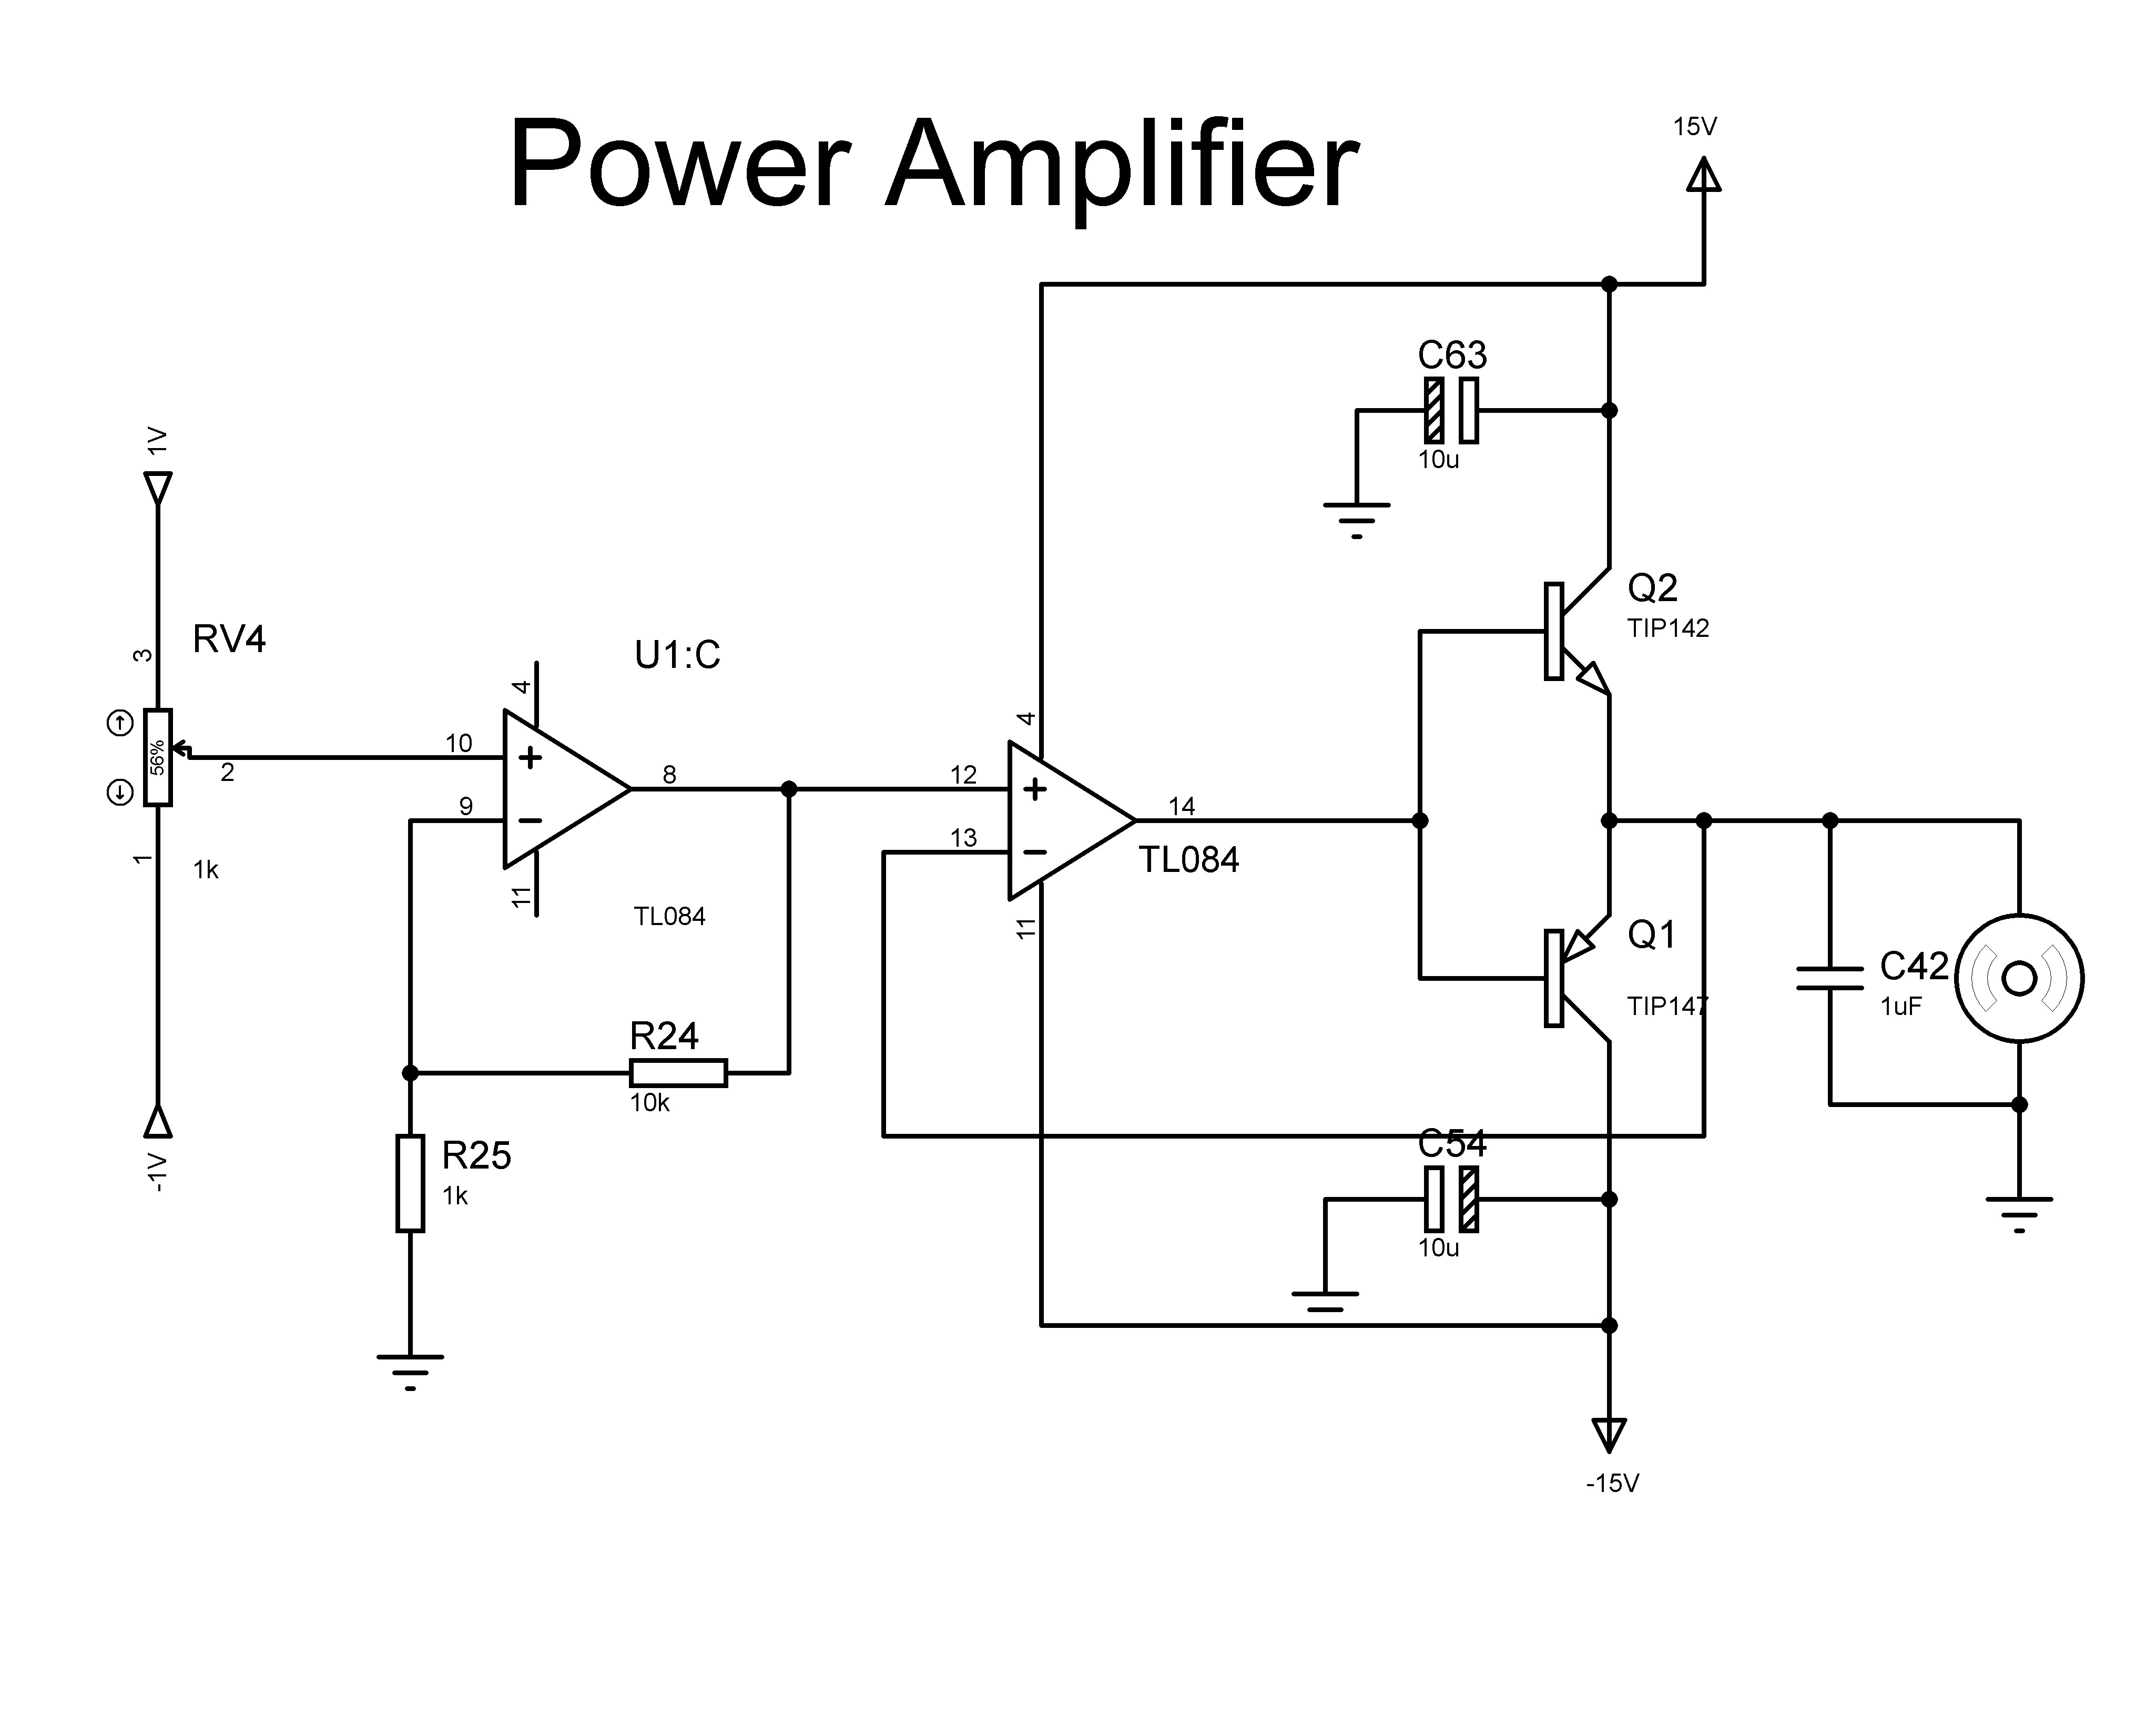 How to limit the bandwidth of an opamp